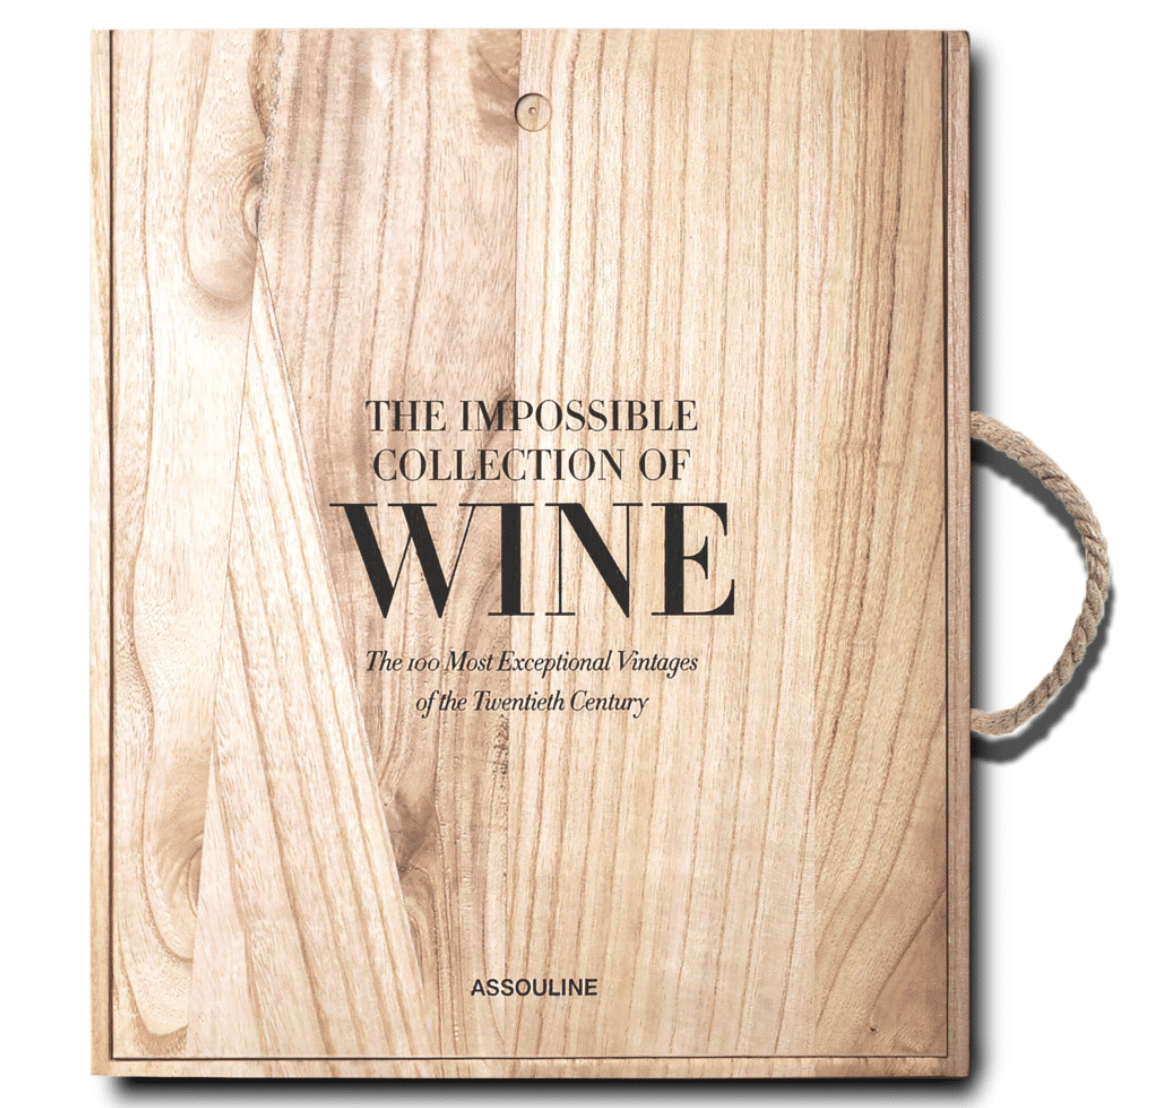 The Impossible Collection of Wine - Assouline - Father's Day gift ideas - Father's Day gift